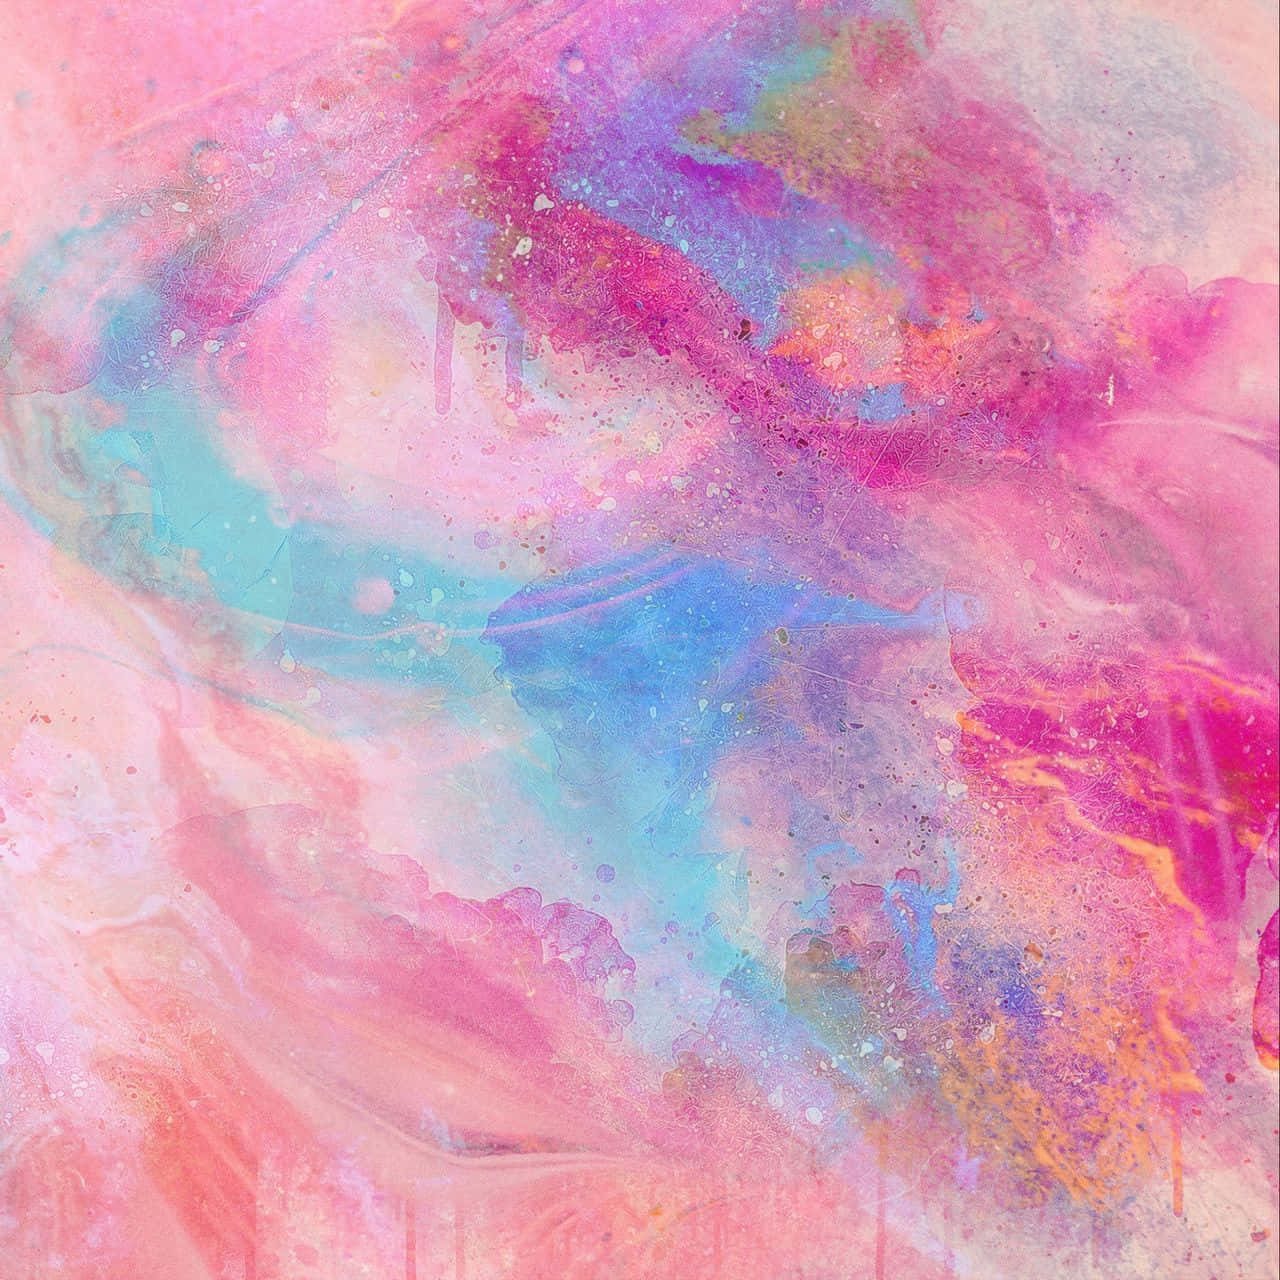 A Pink And Blue Abstract Painting With A Lot Of Swirls Wallpaper